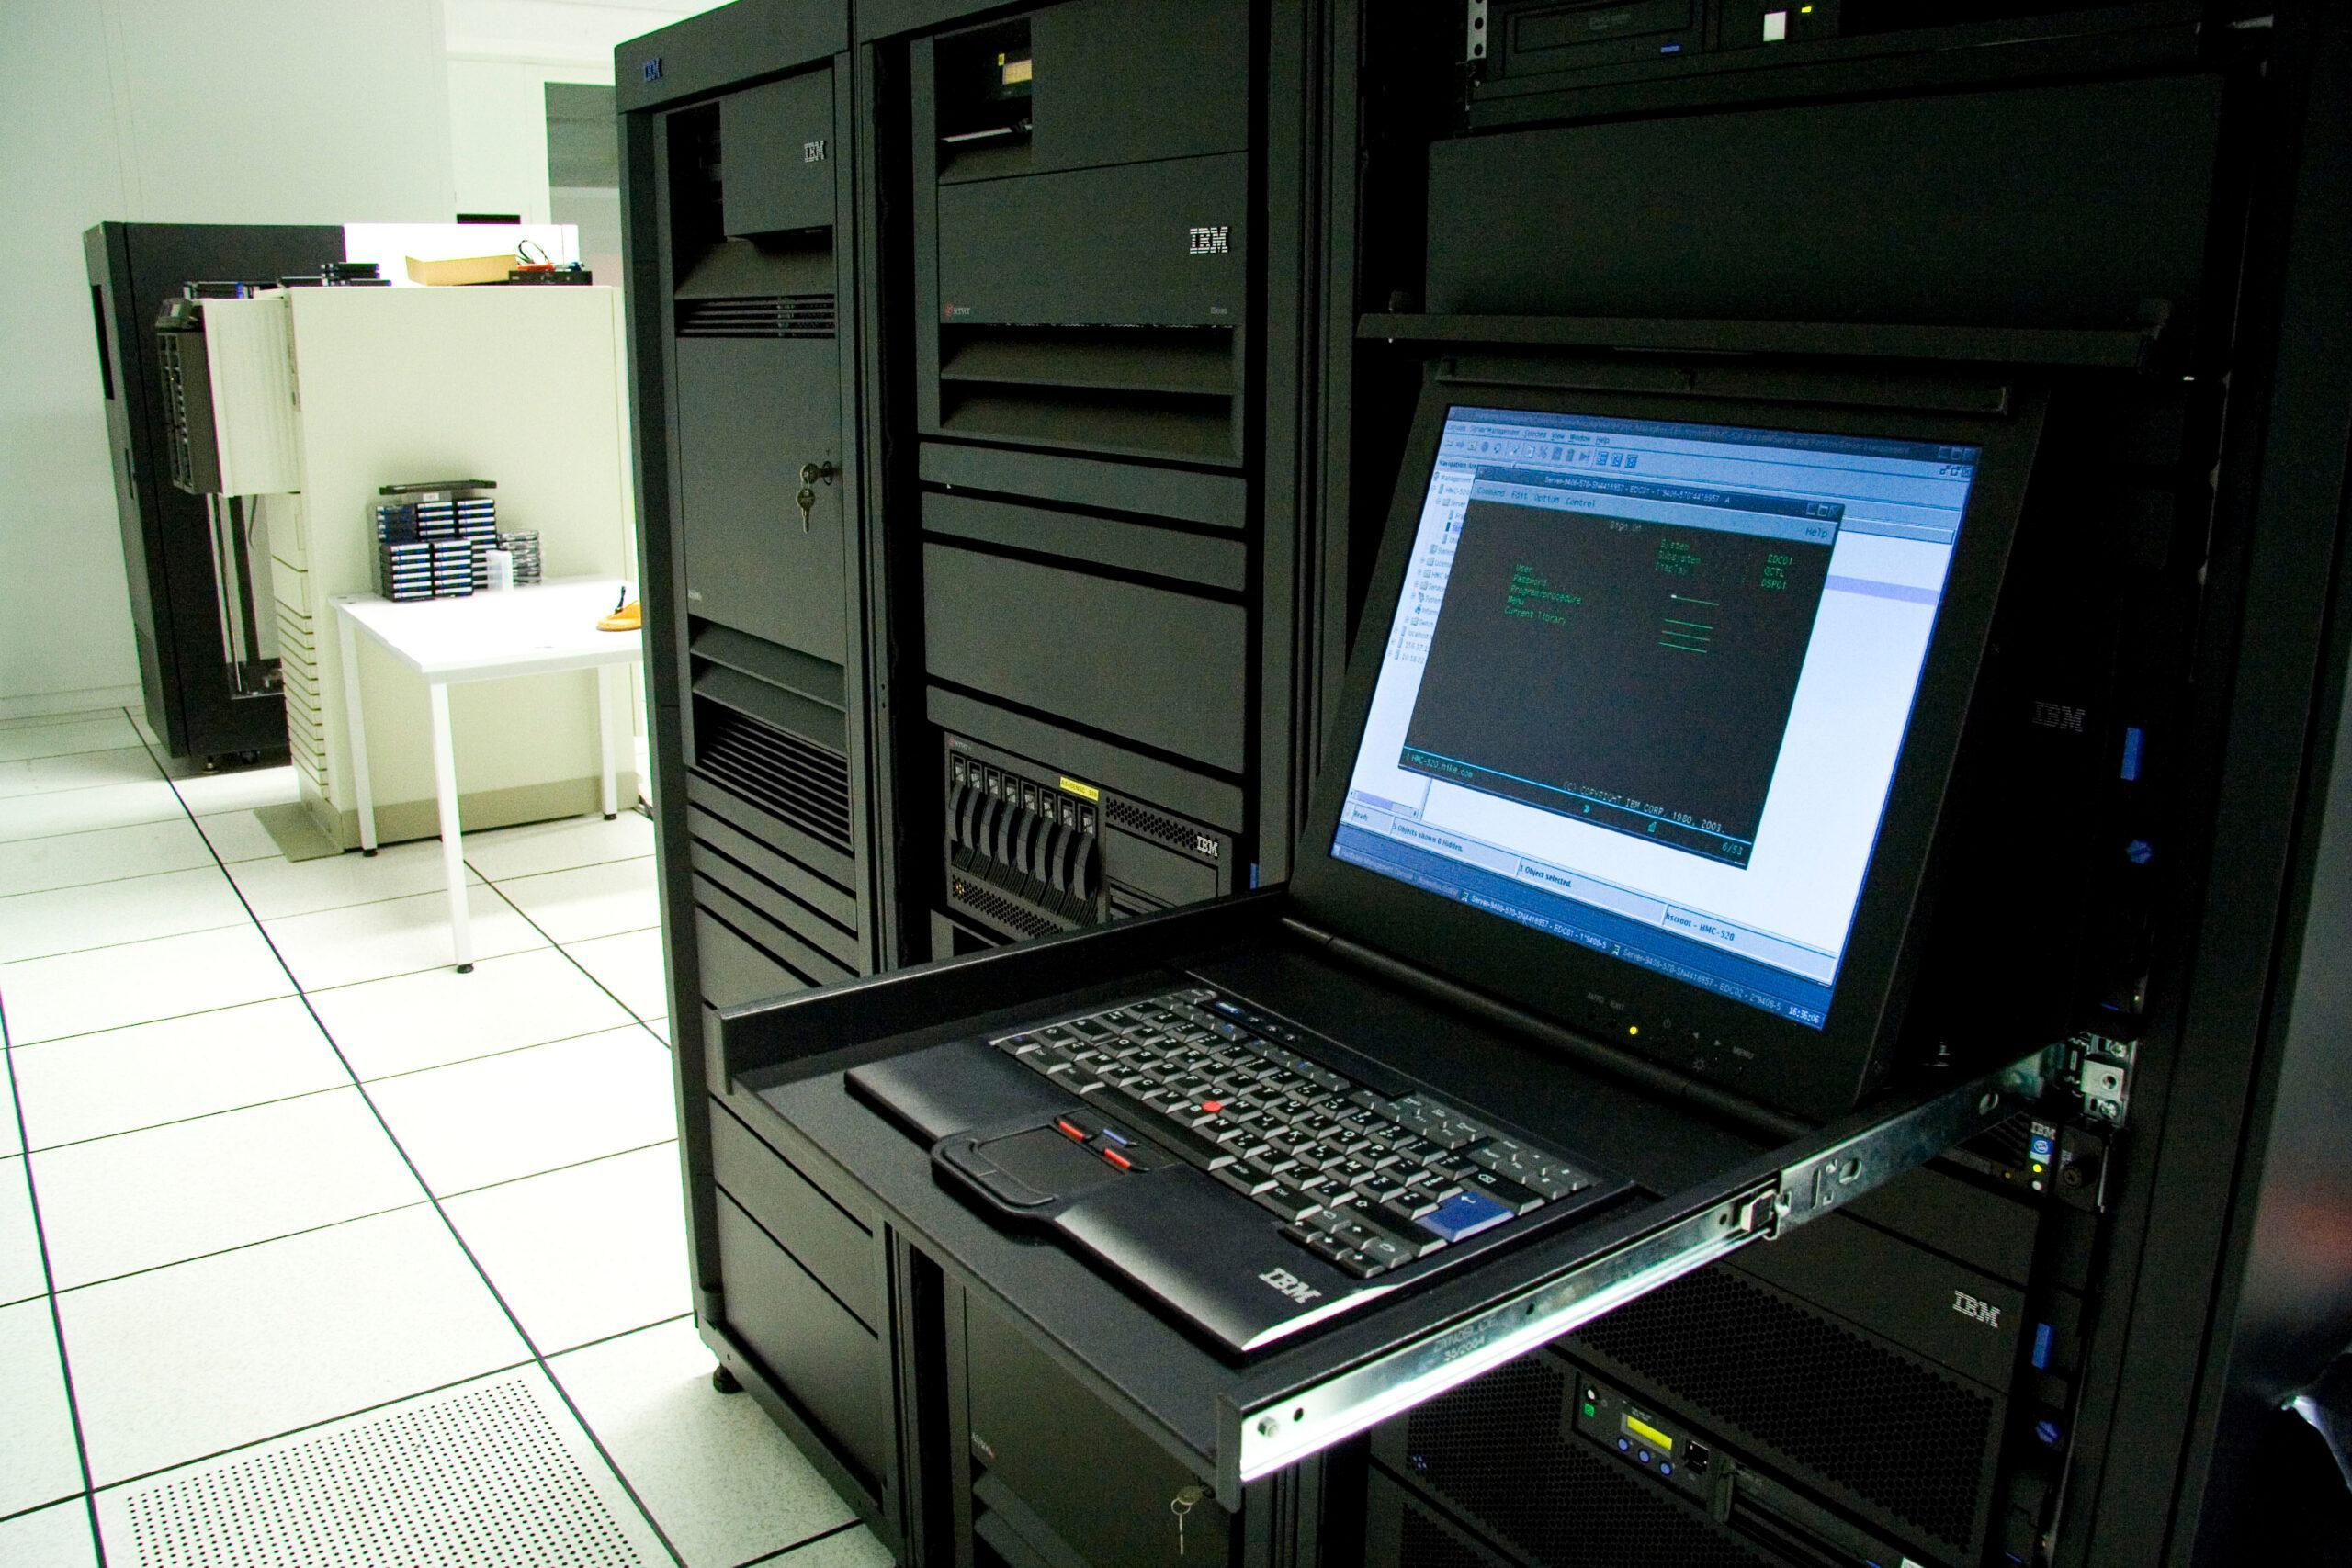 IBM AS400 mainframe with console